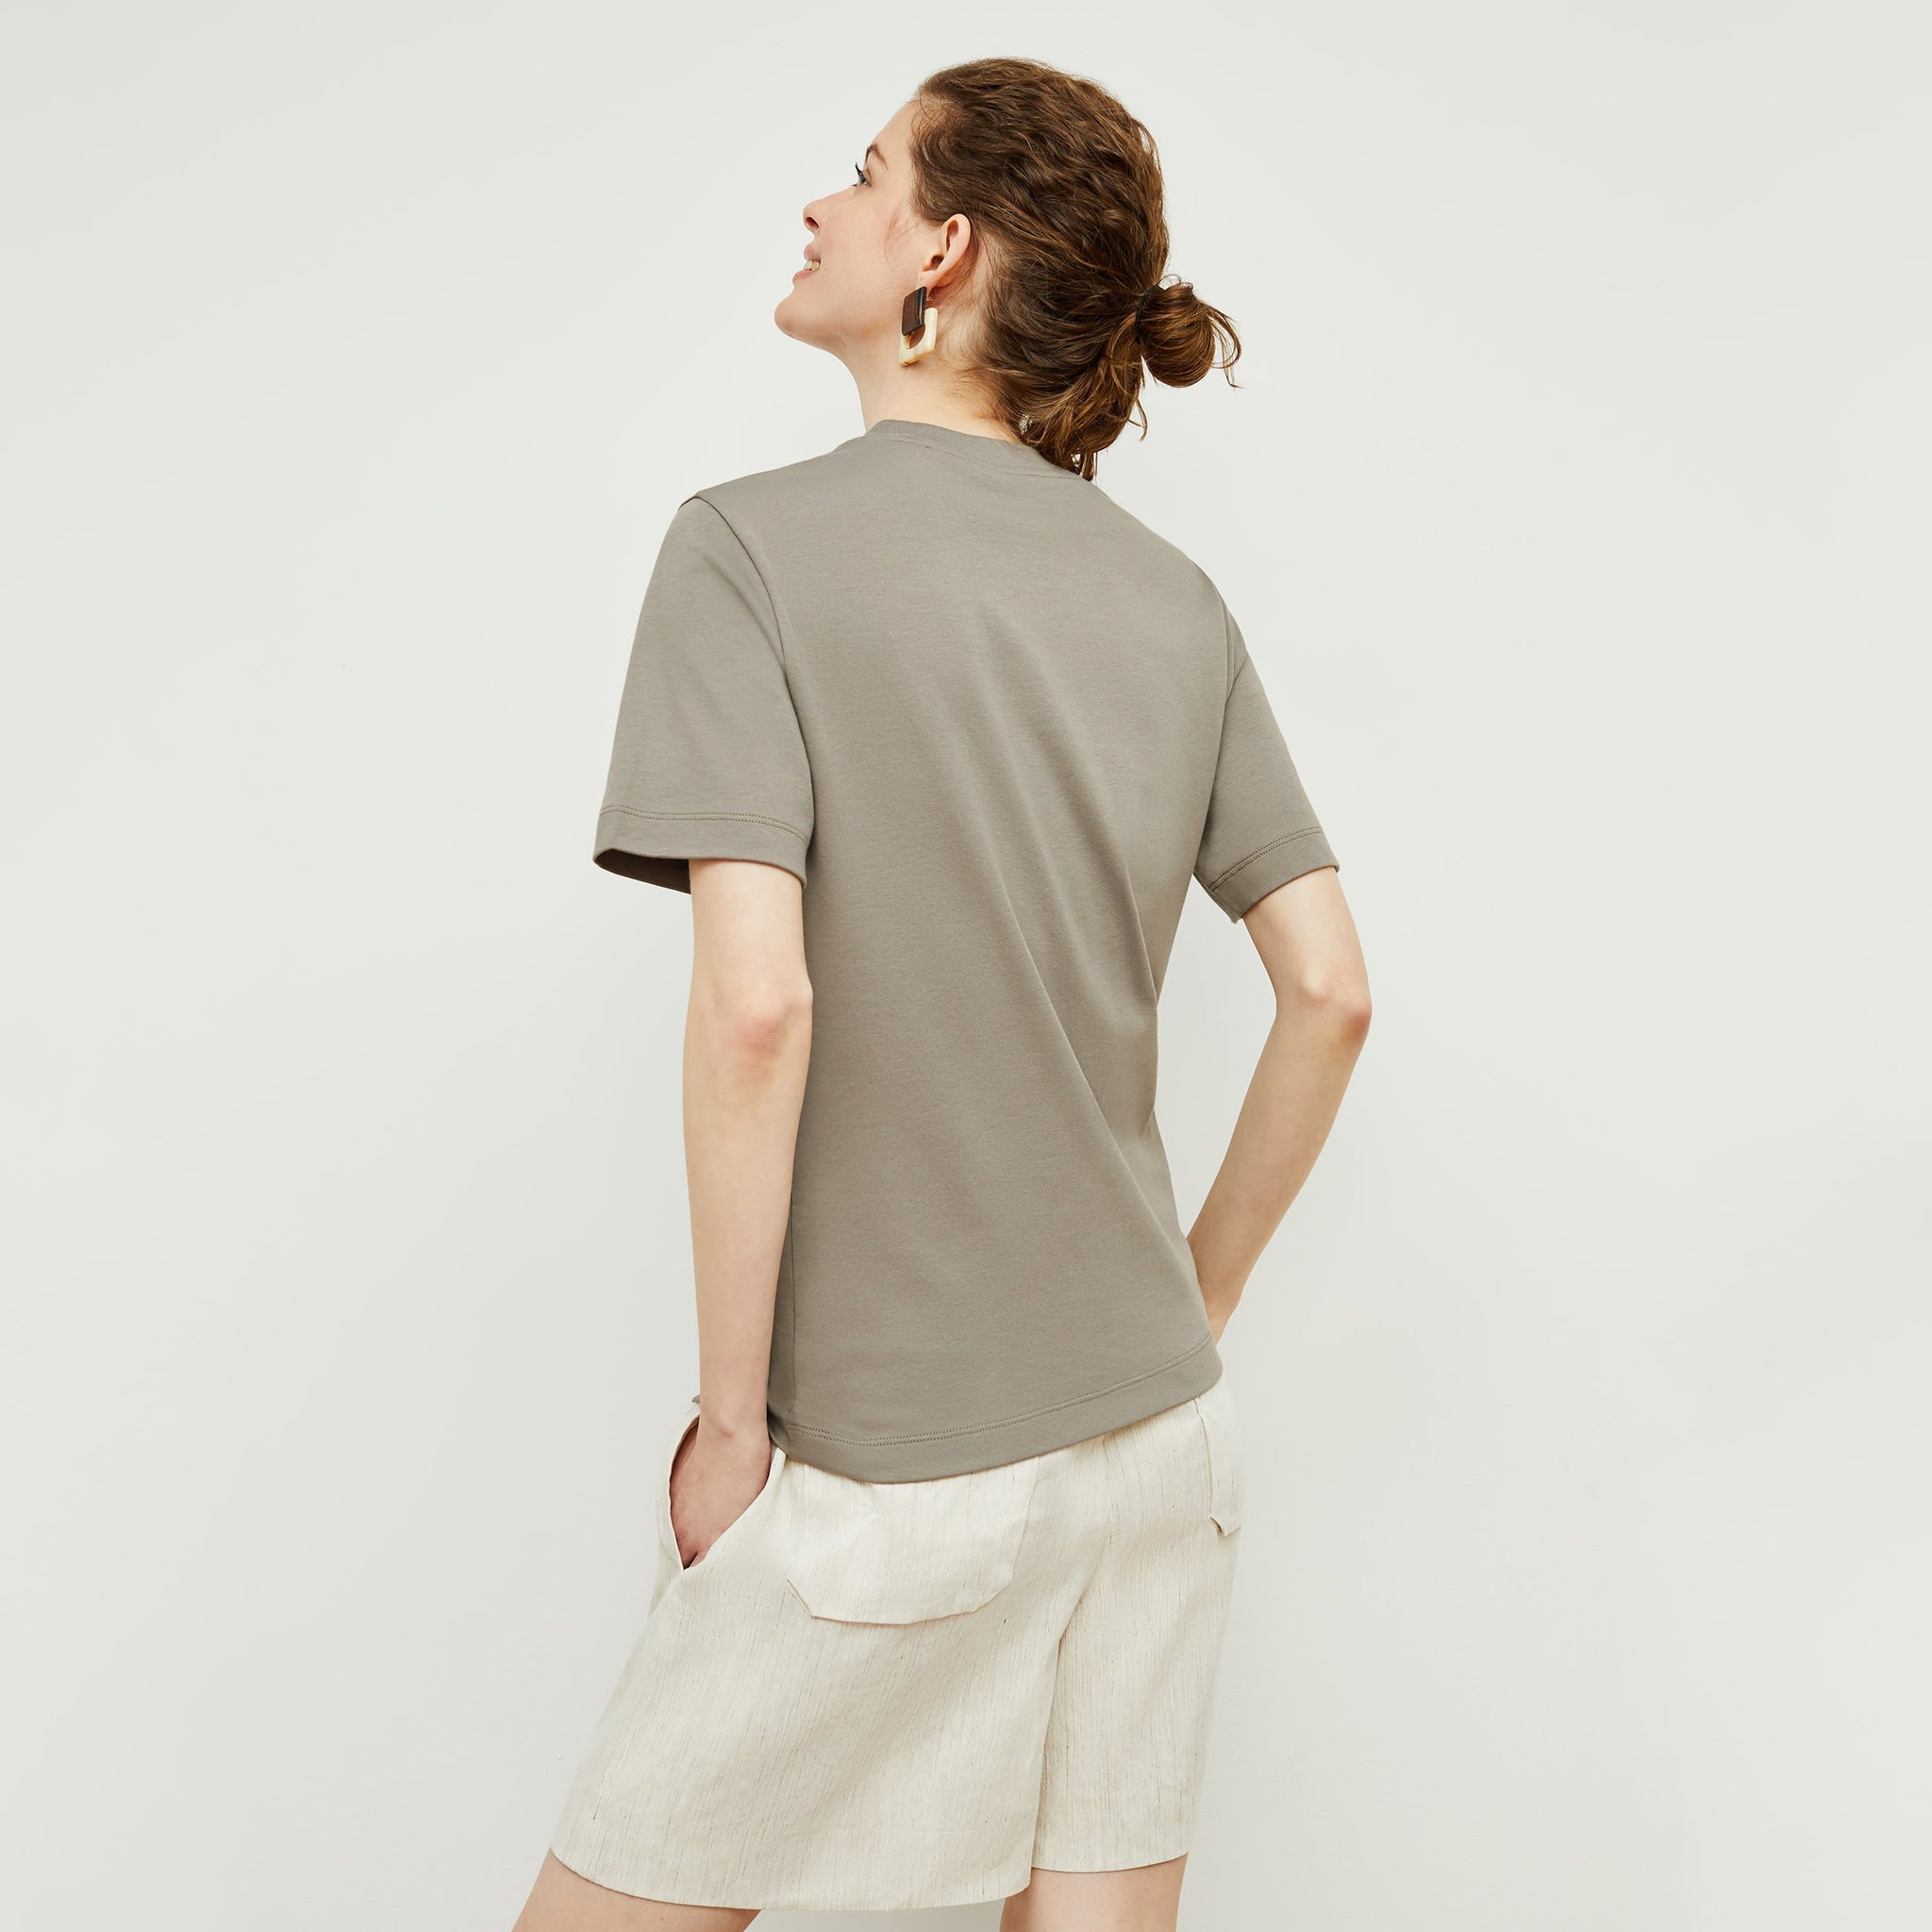 Back image of a woman standing wearing the Leslie T-Shirt—Compact Cotton in Pebble